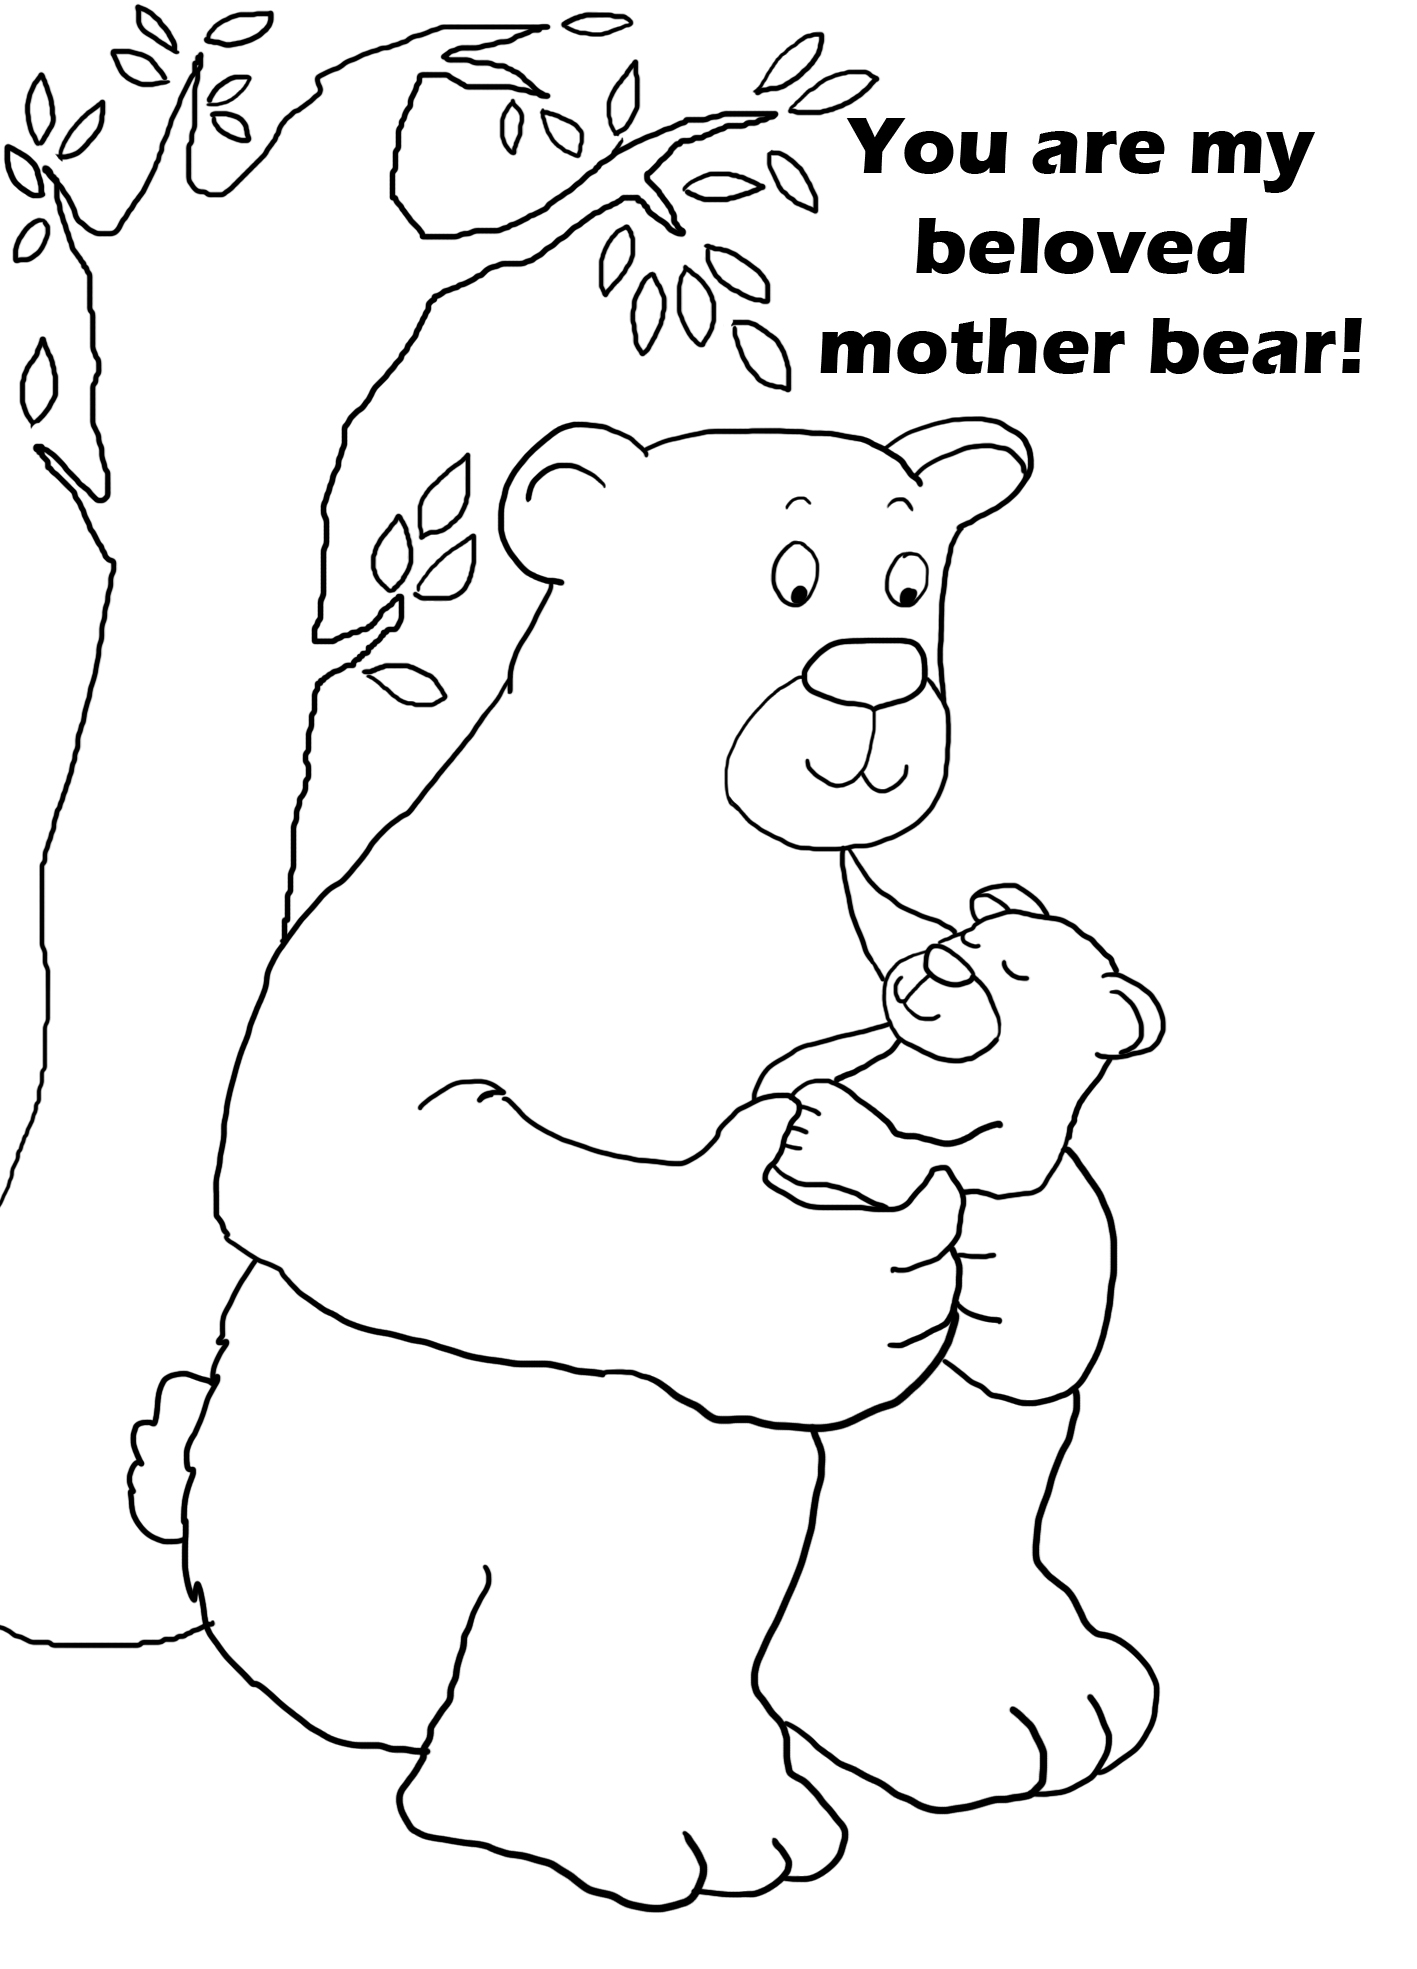 mother's day coloring with mother bear